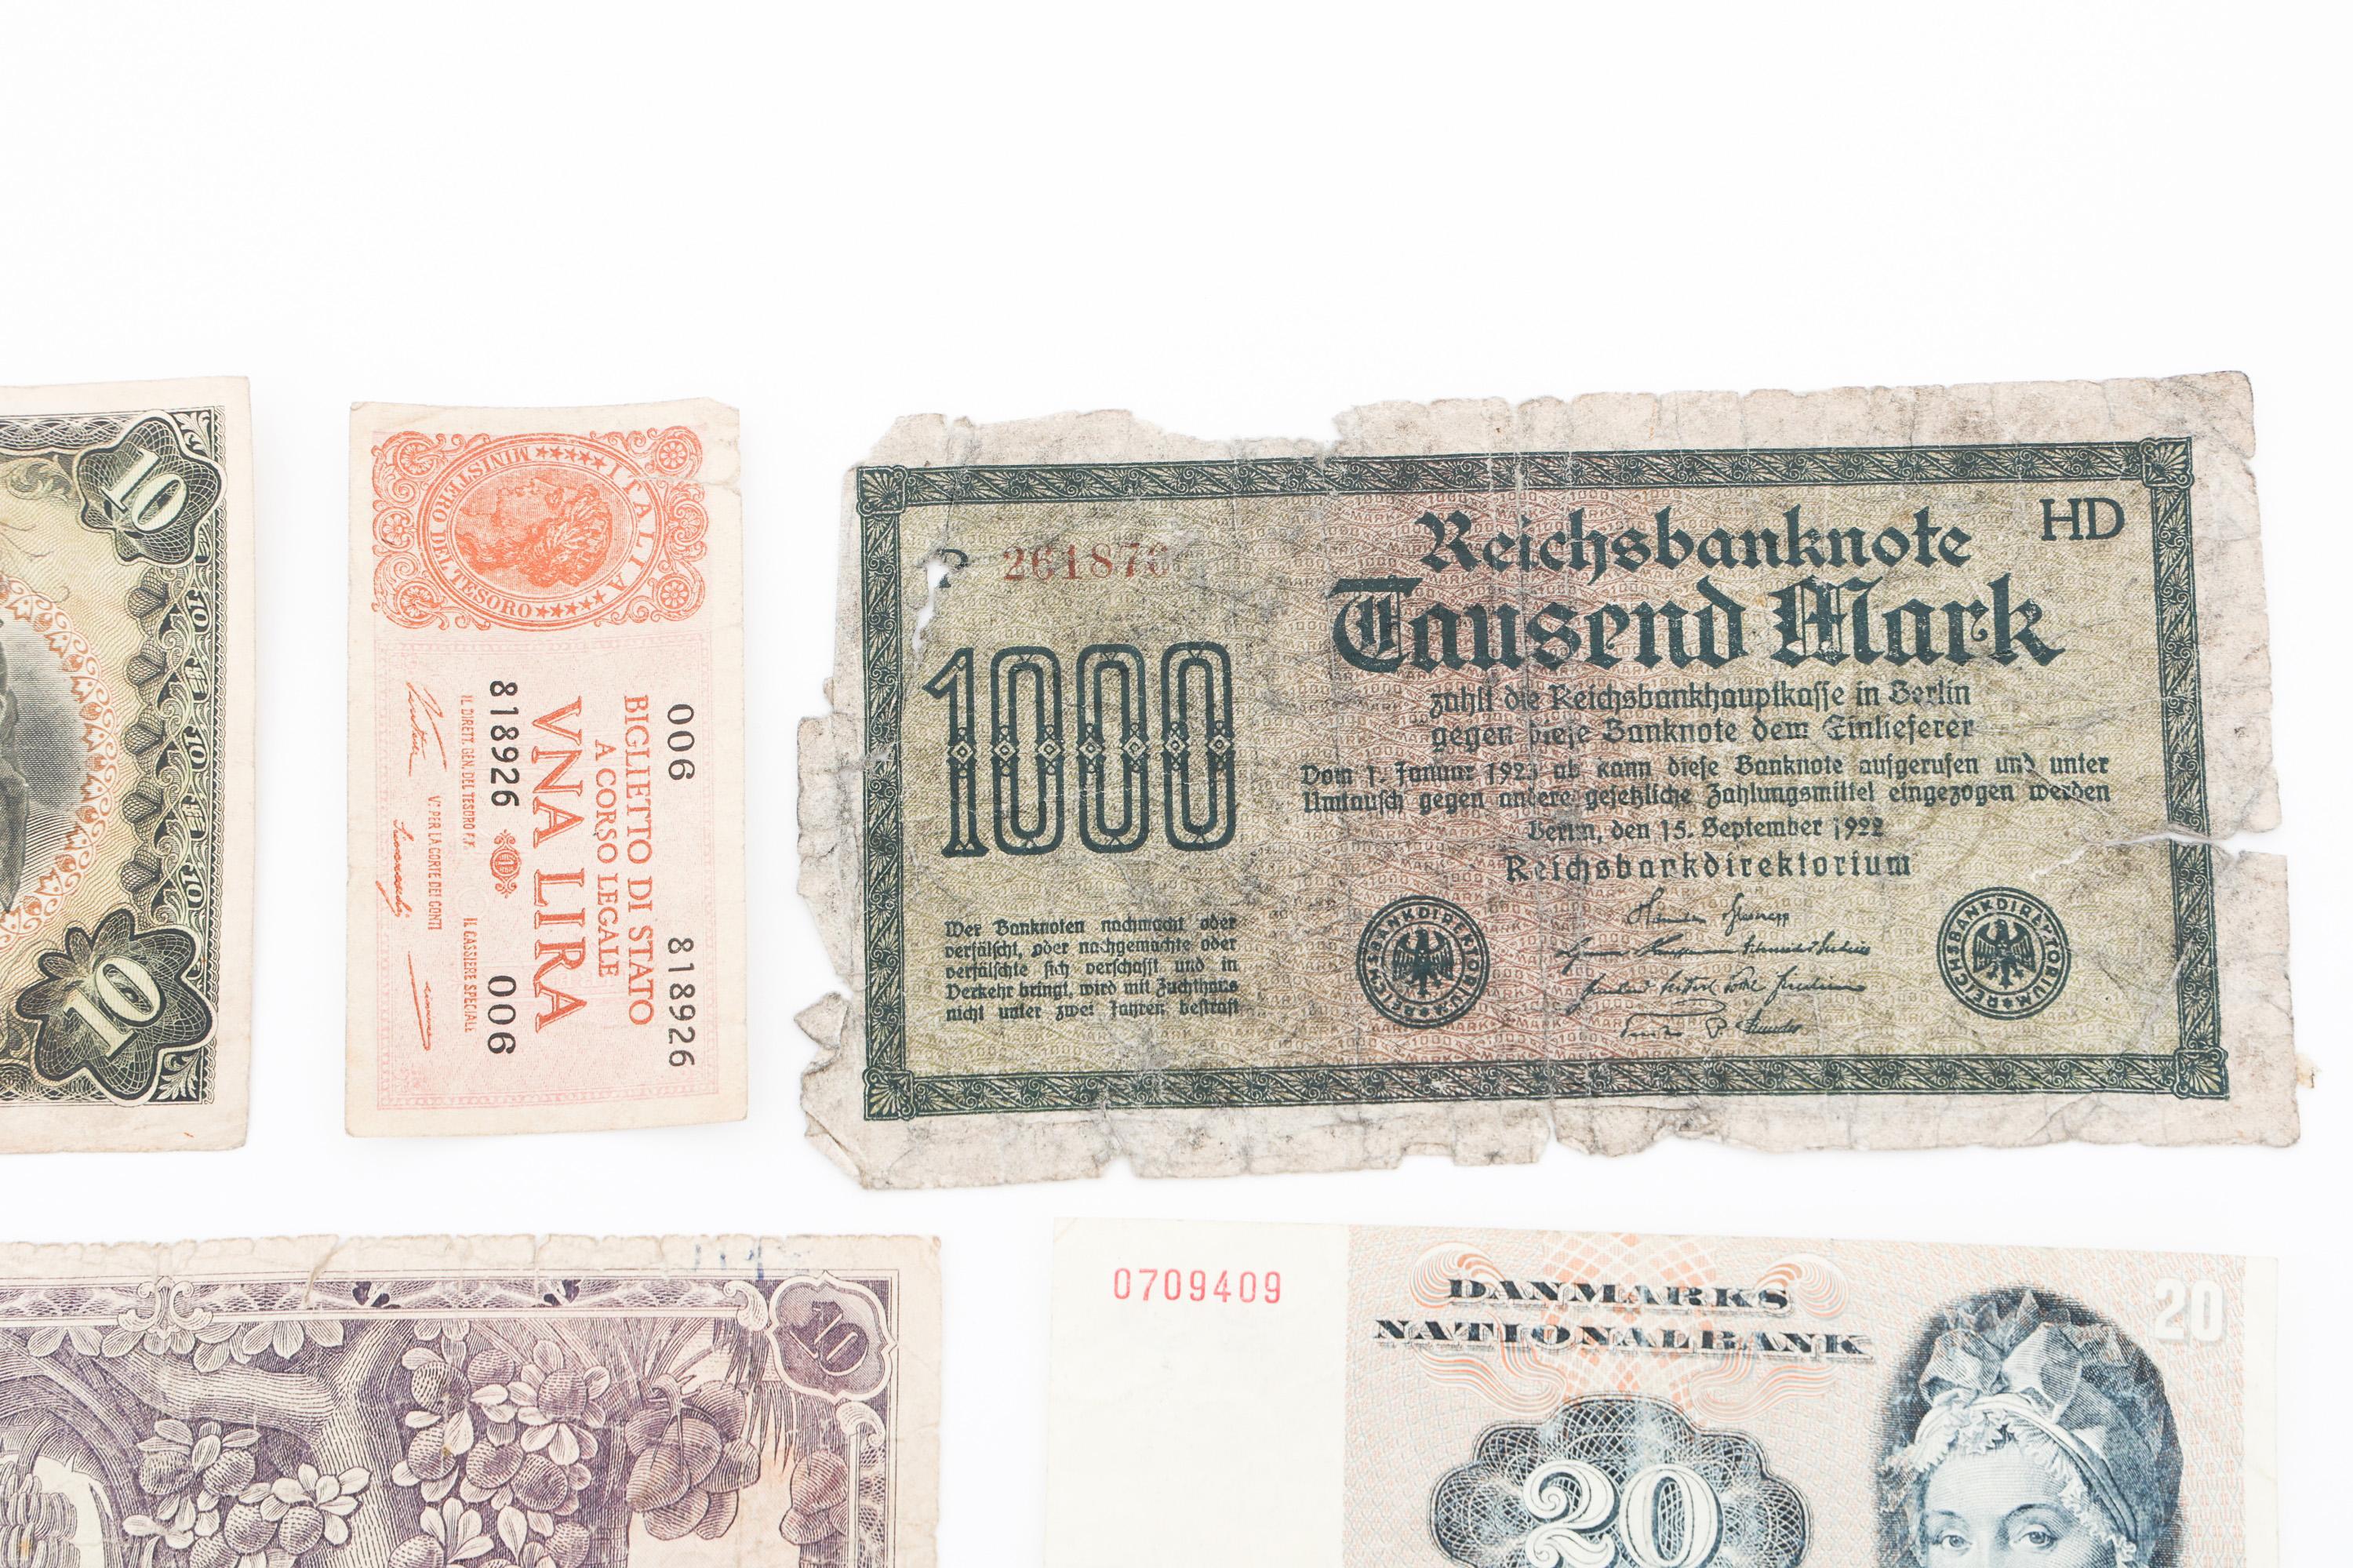 WWII - COLD WAR OCCUPATION & WORLD BANK NOTES